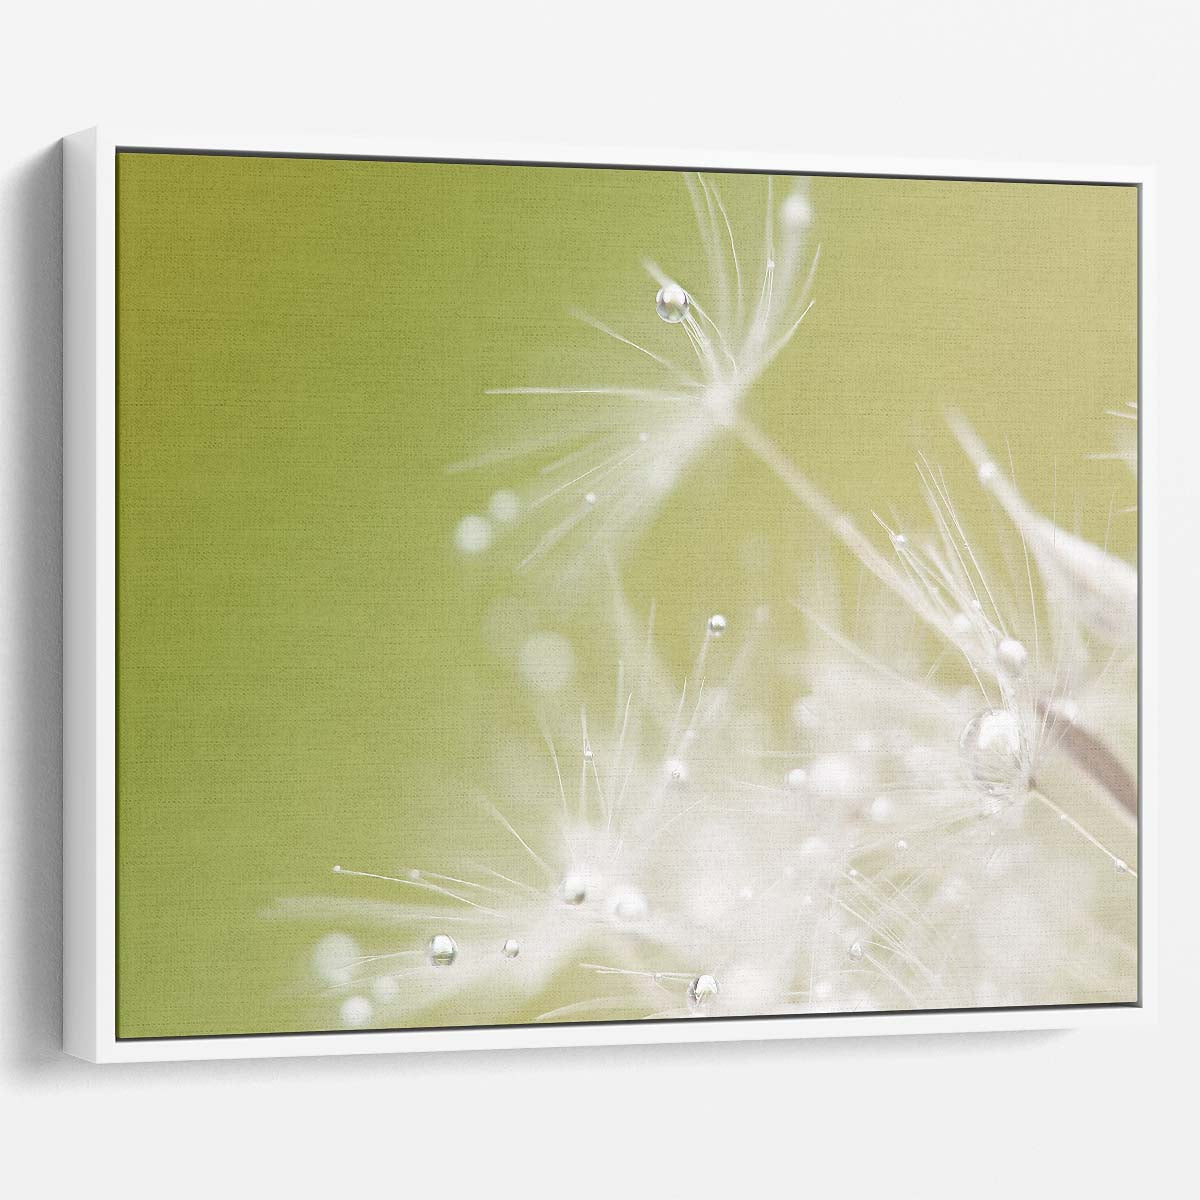 Delicate White Dandelion & Water Drops Macro Wall Art by Luxuriance Designs. Made in USA.